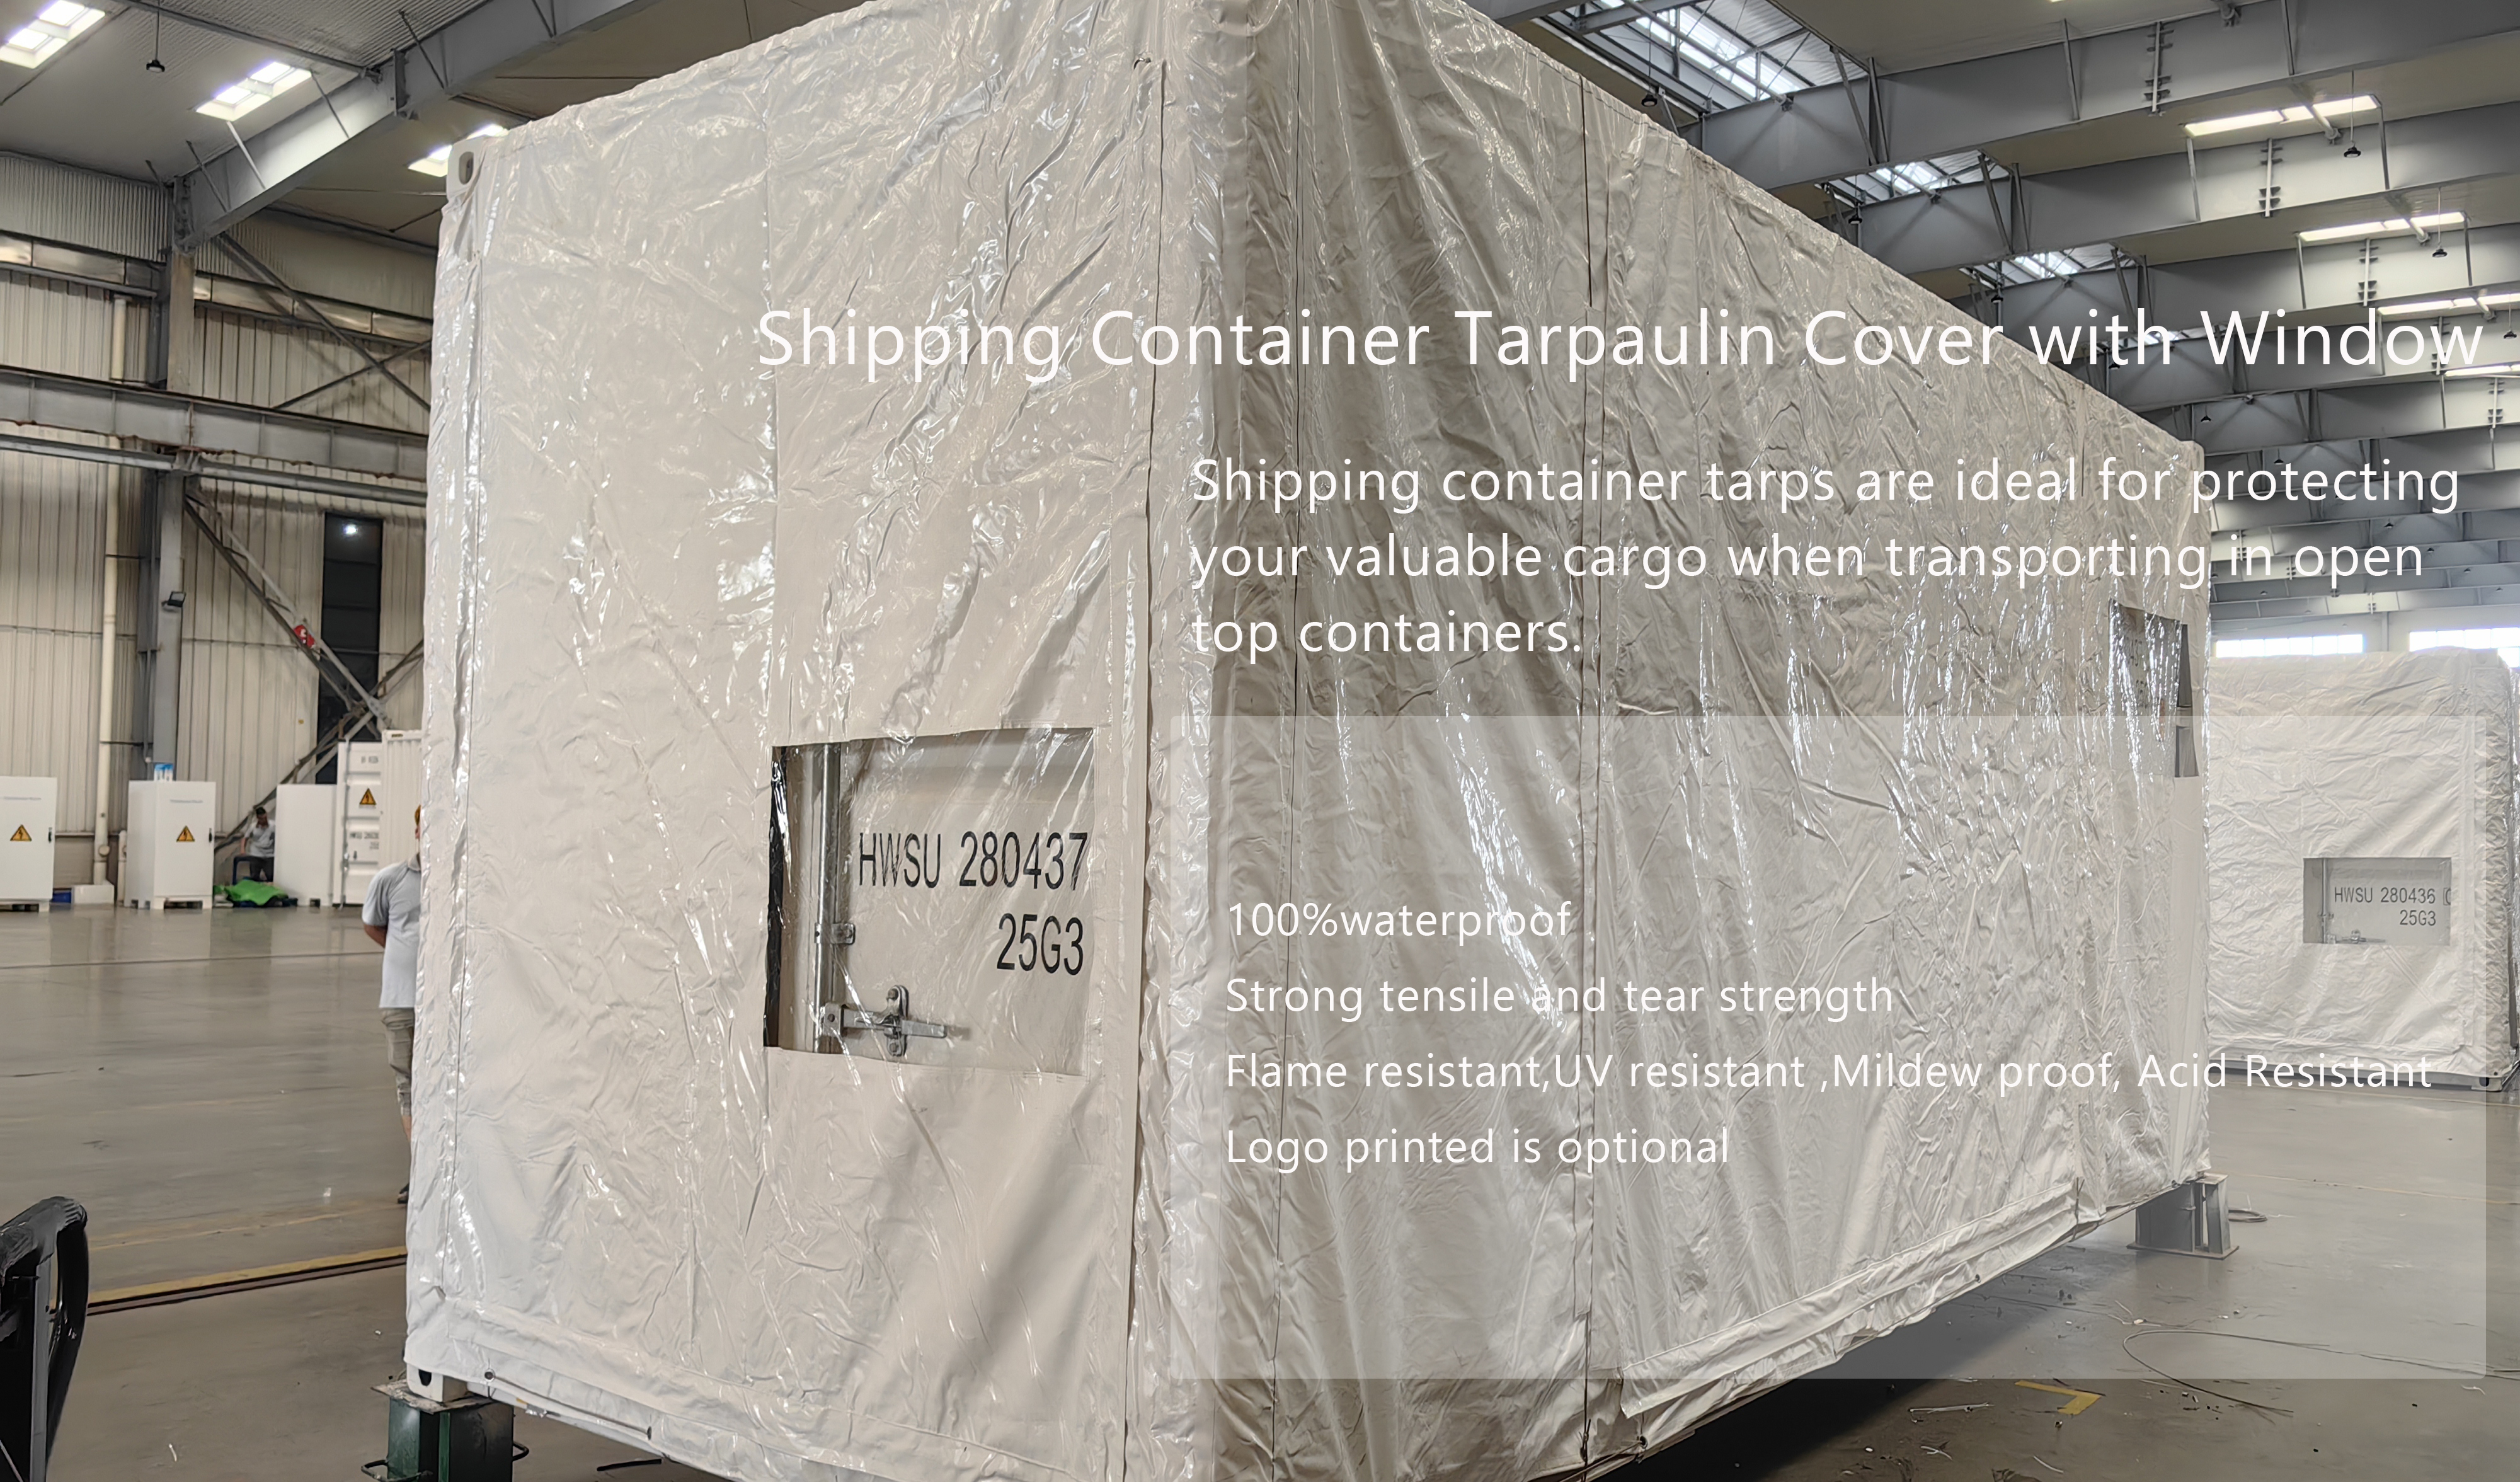 PVC tarpaulin cover,soft open top shipping container,shipping container covers,open top container tarpaulin cover,Shipping container tarpaulin cover with window